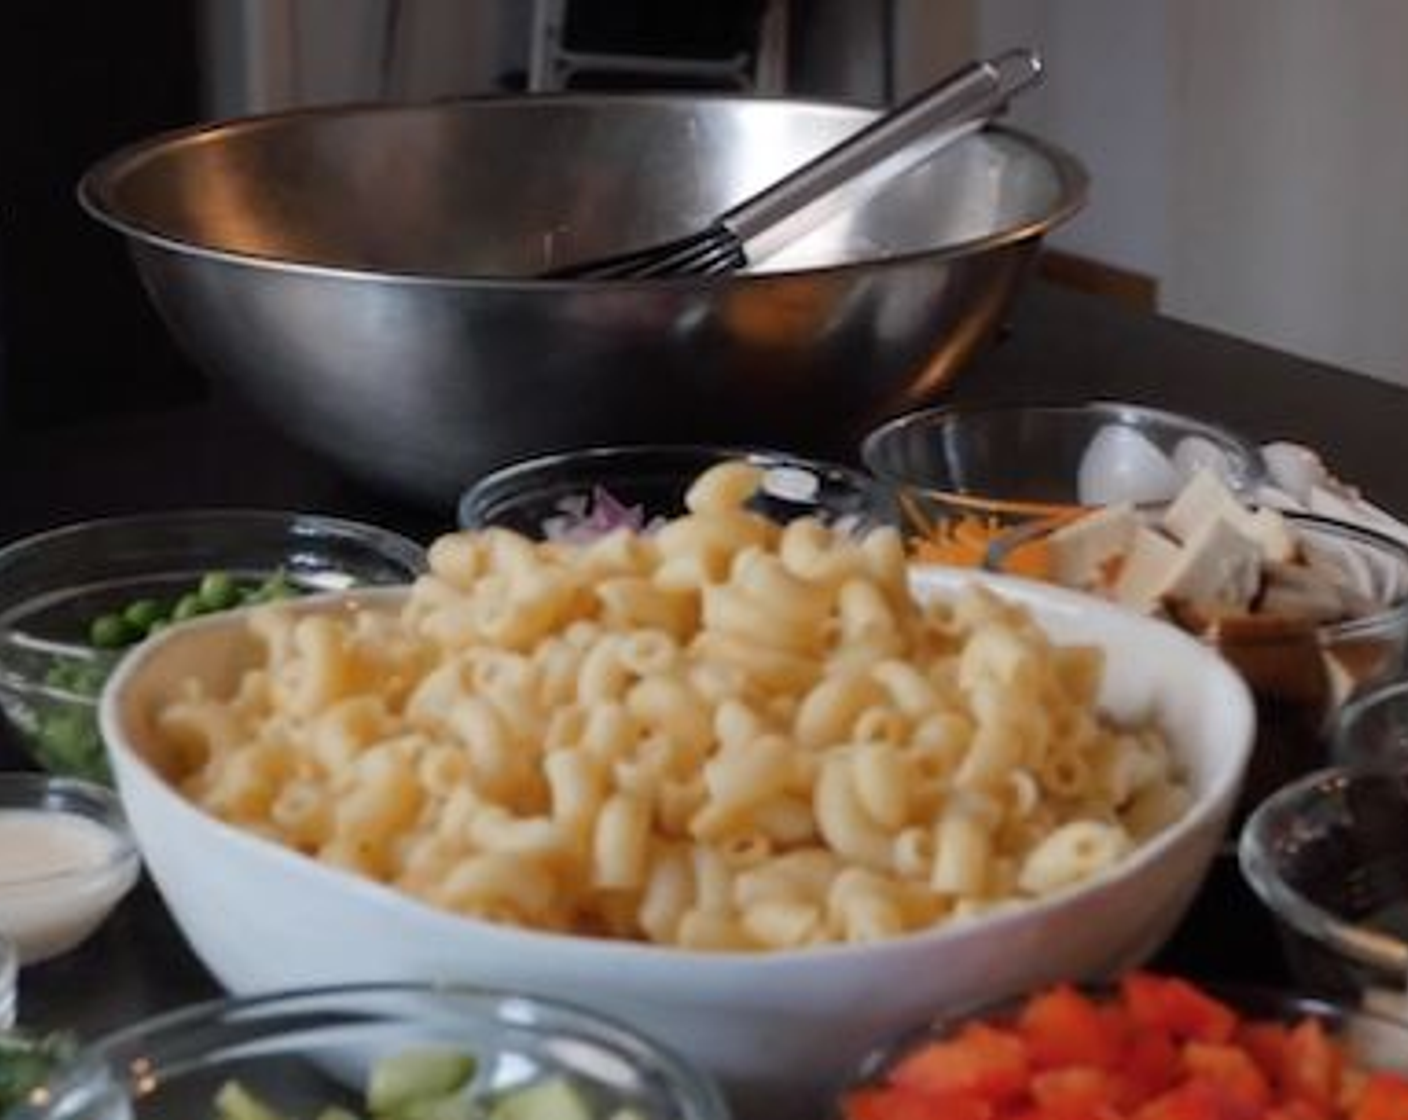 step 1 Bring a large pot of salted water to a boil and cook Elbow Macaroni (1 1/2 cups) according to the package instructions. Drain and rinse the pasta well with cold water and allow it to sit in the colander and drain of water completely.